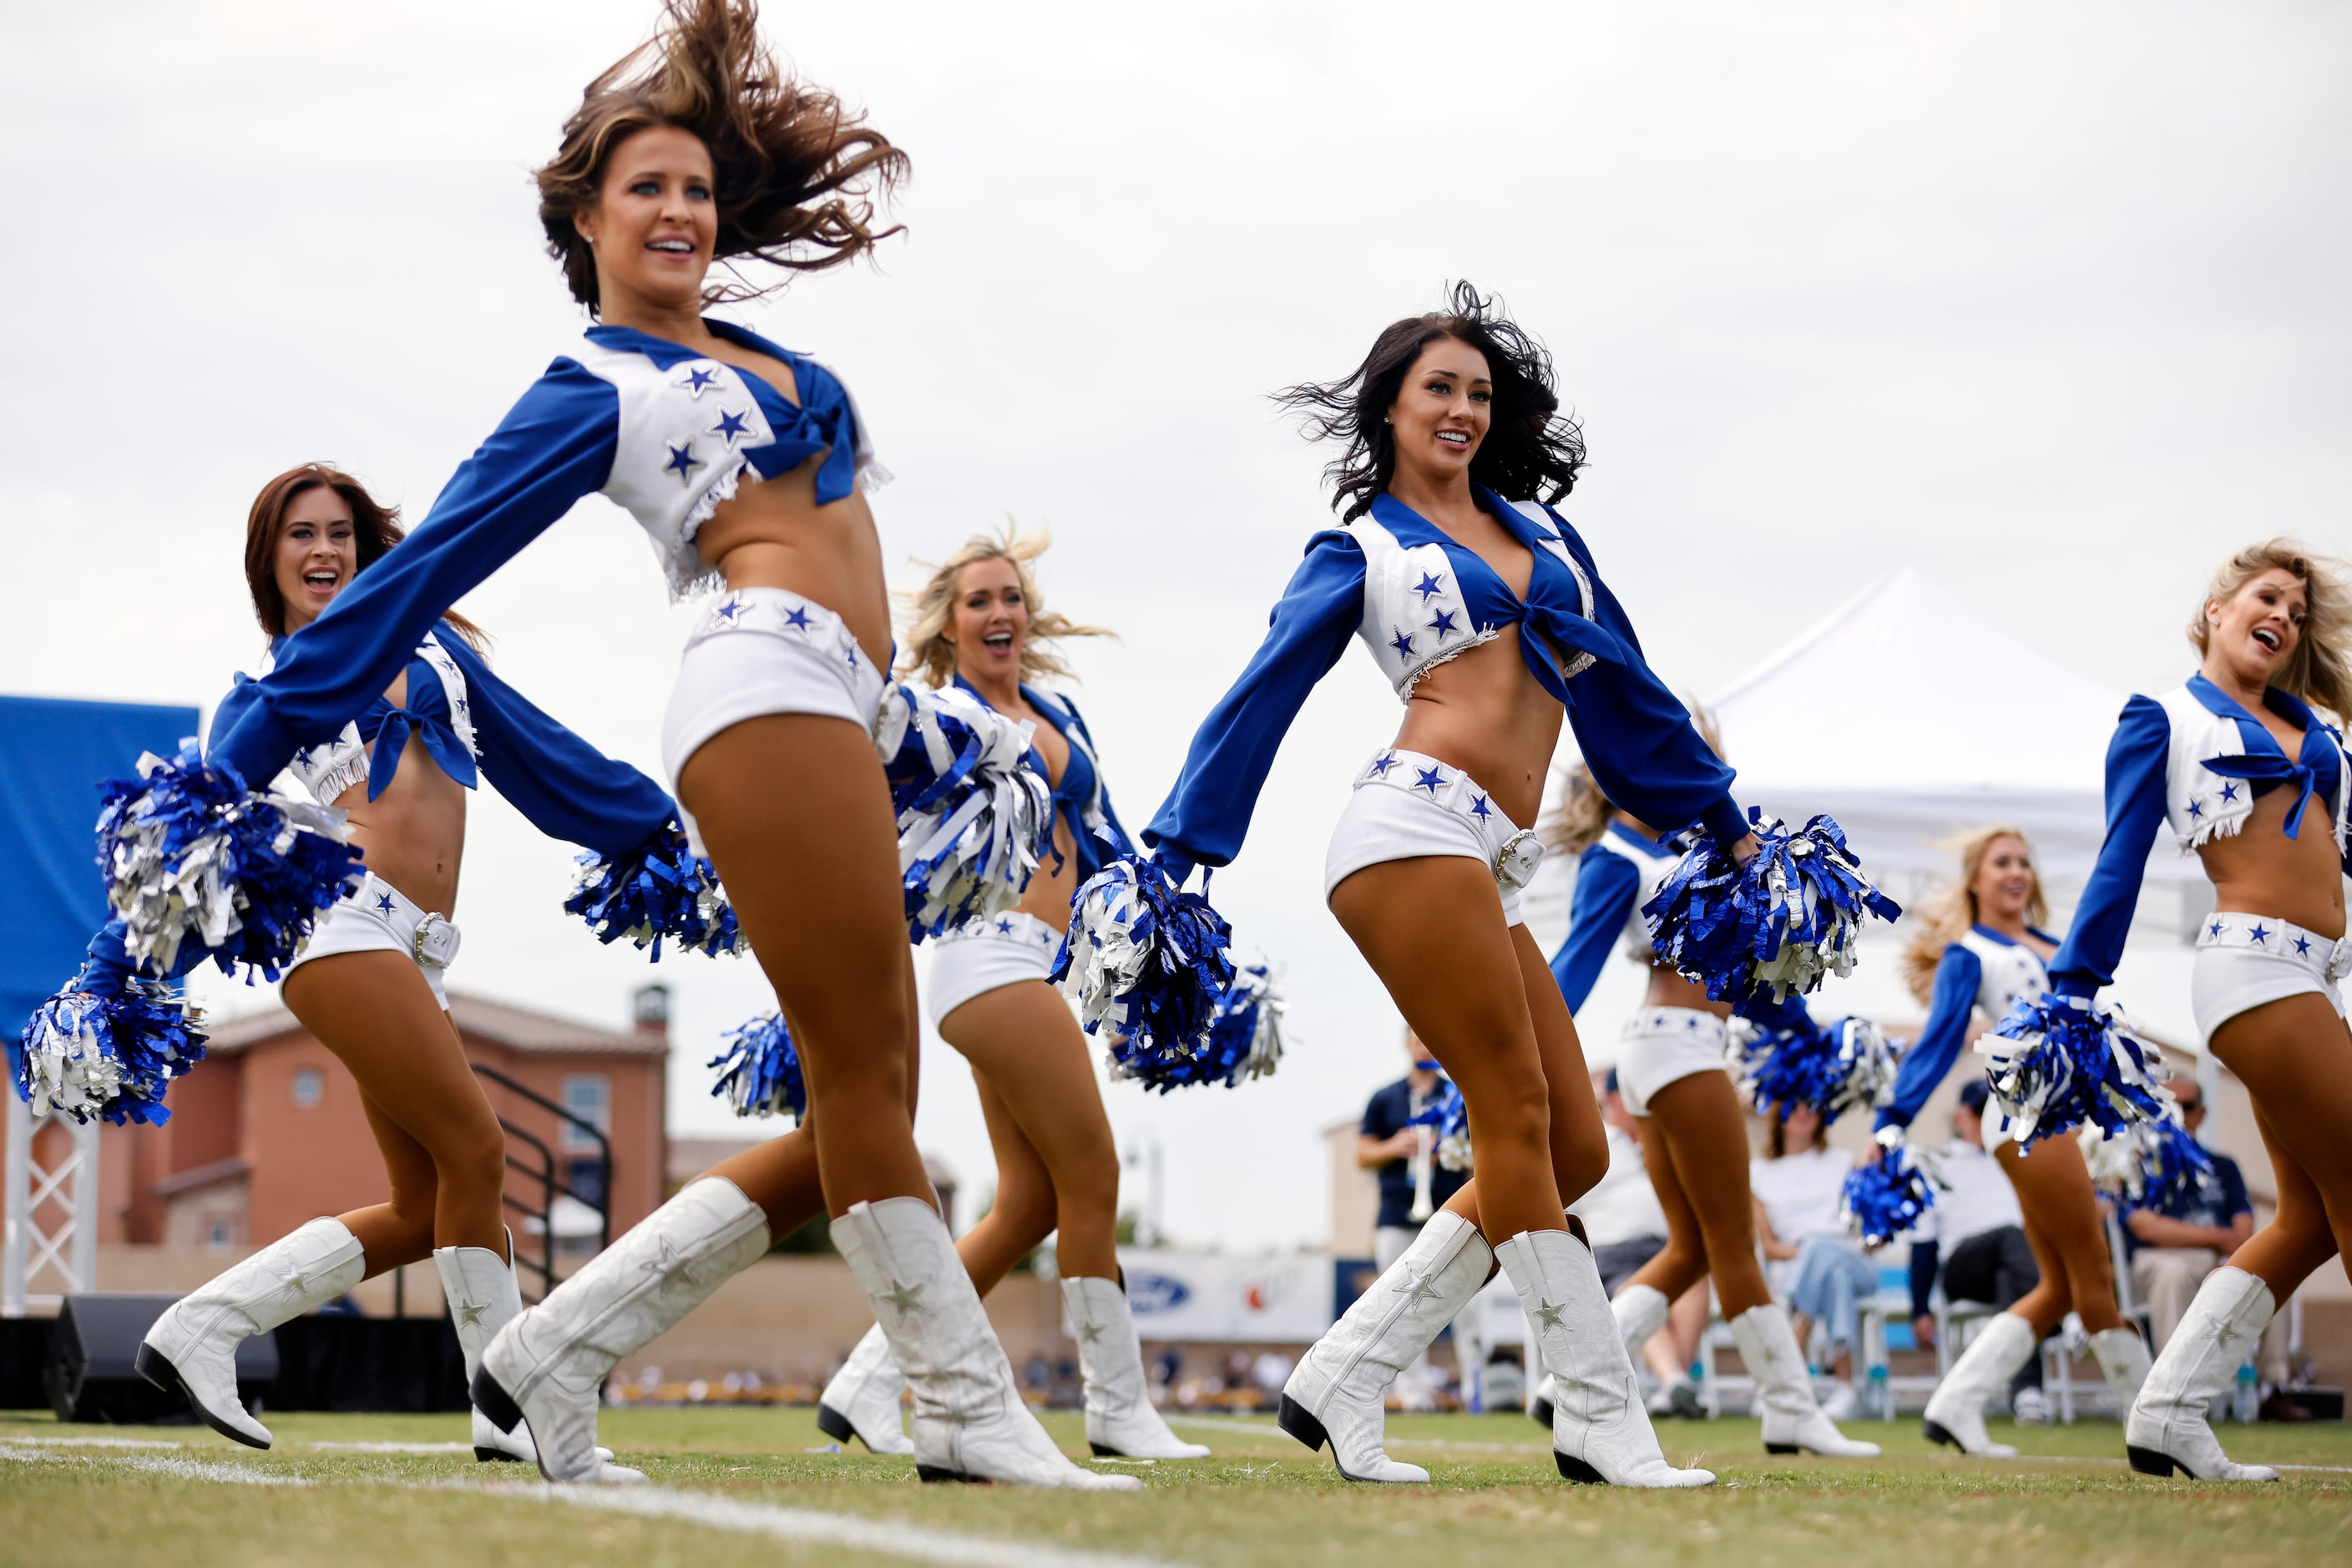 Photos: Kick back and celebrate! Dallas Cowboys Cheerleaders perform at  training camp opening ceremonies